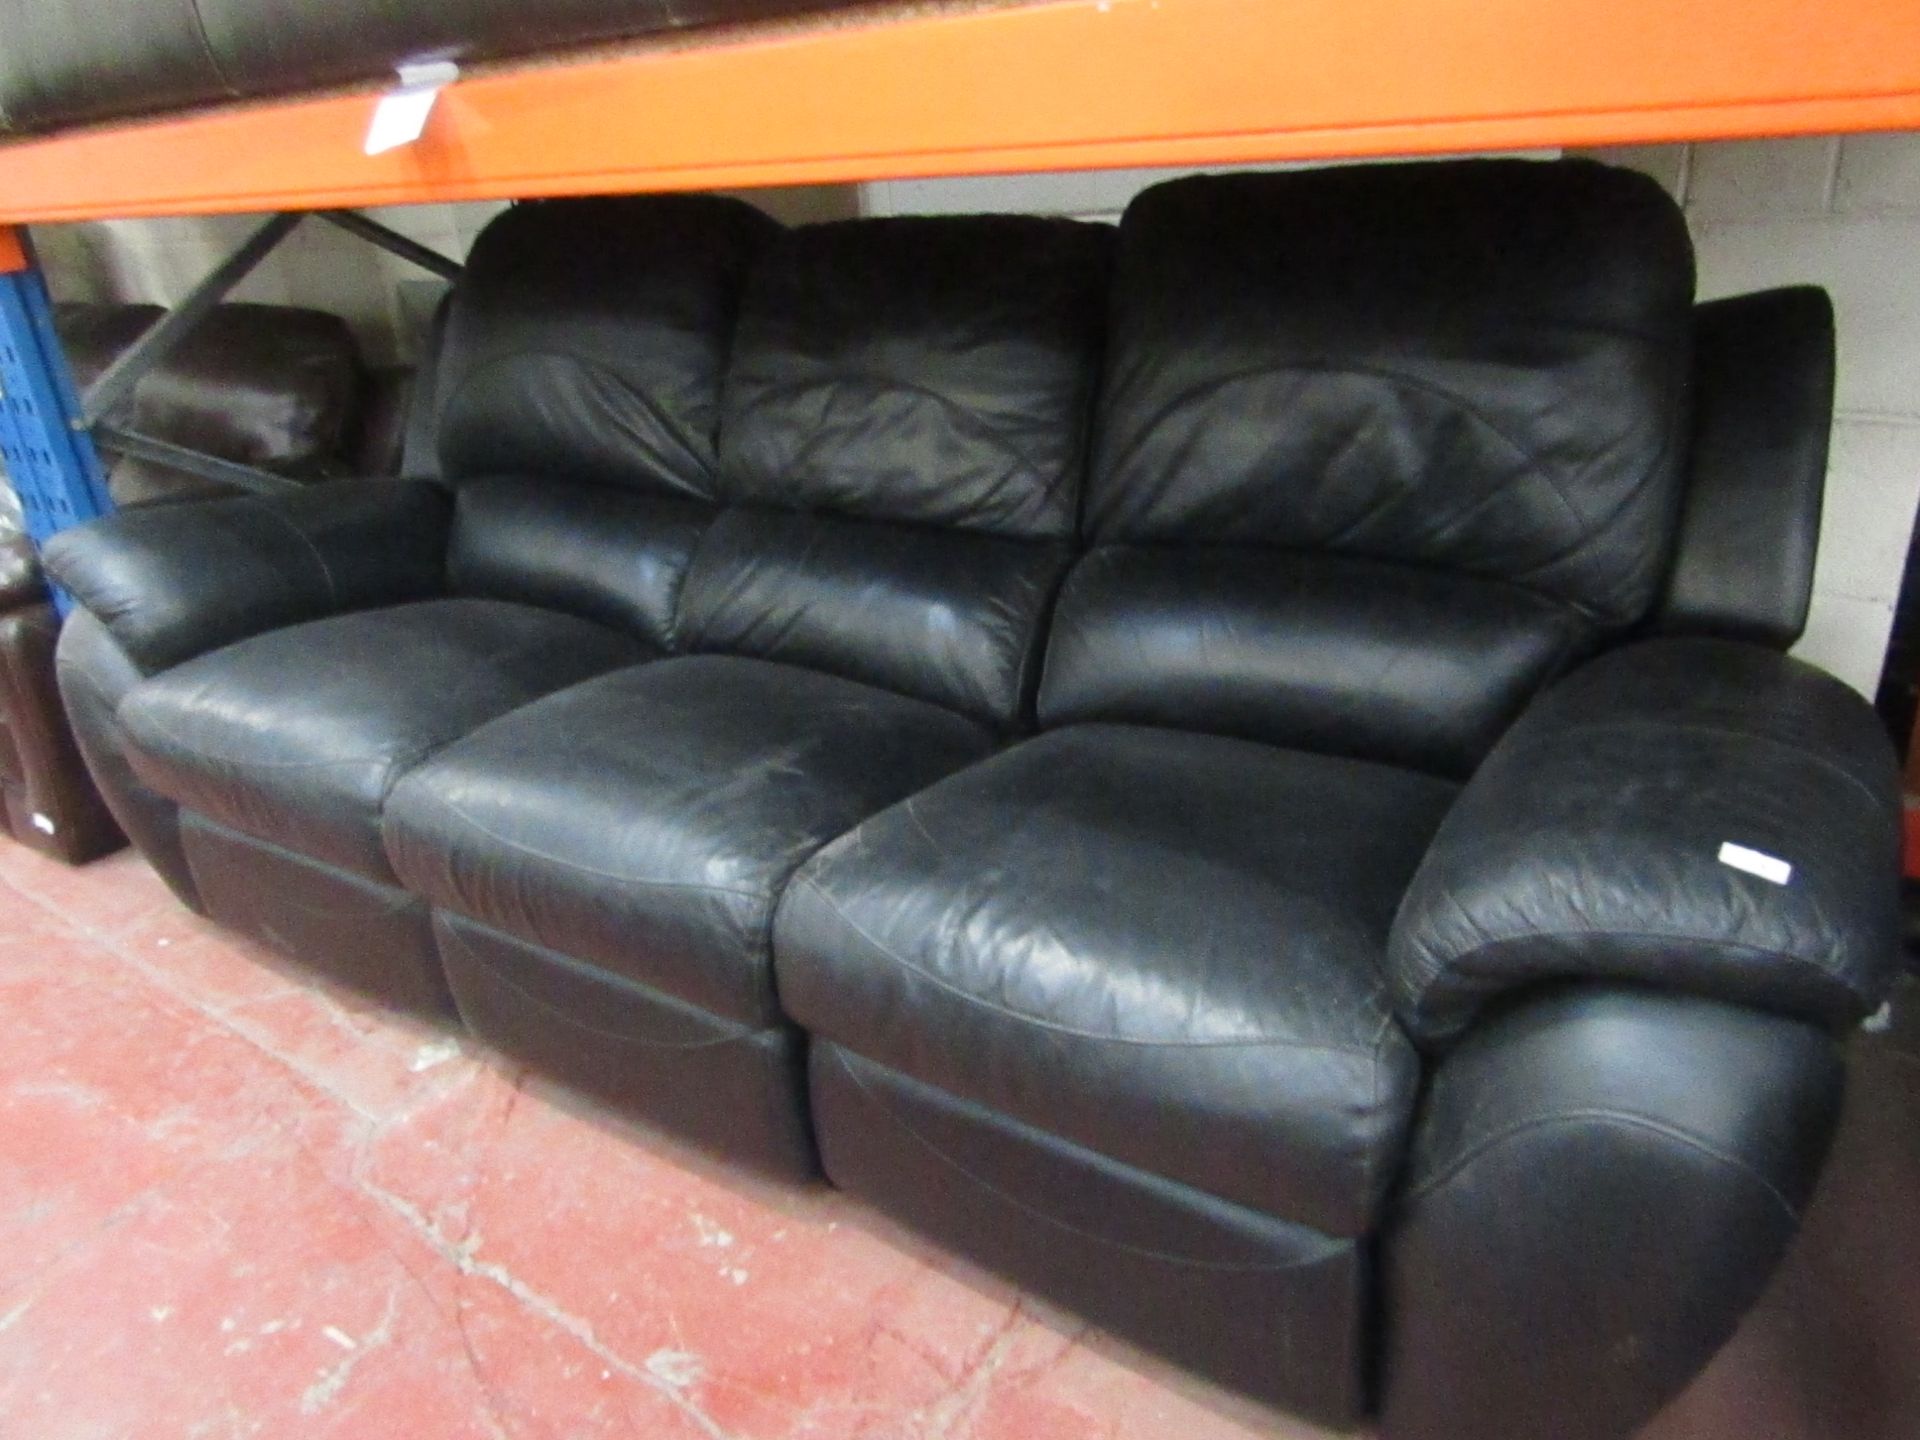 3 seater black LA-Z-BOY manual reclining leather sofa, tested working